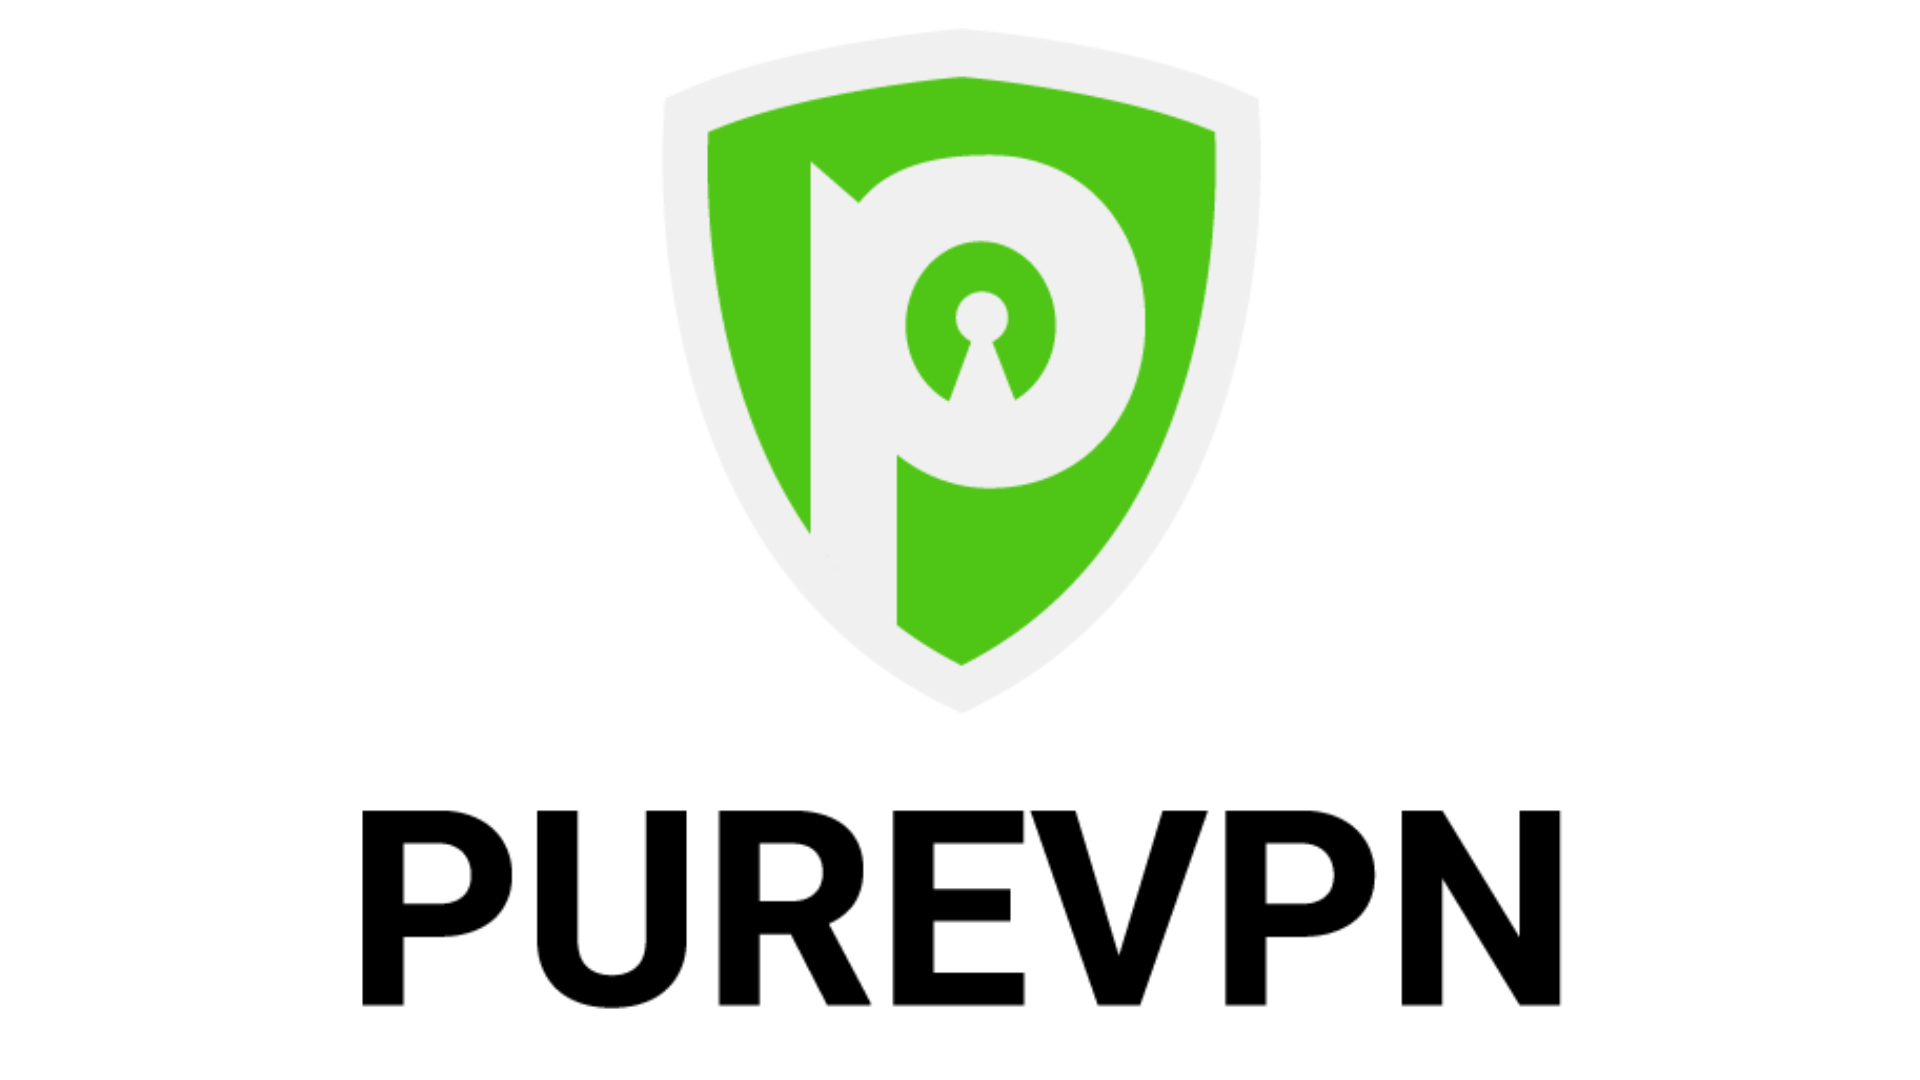 VPN costs for PureVPN. Image shows the company logo.